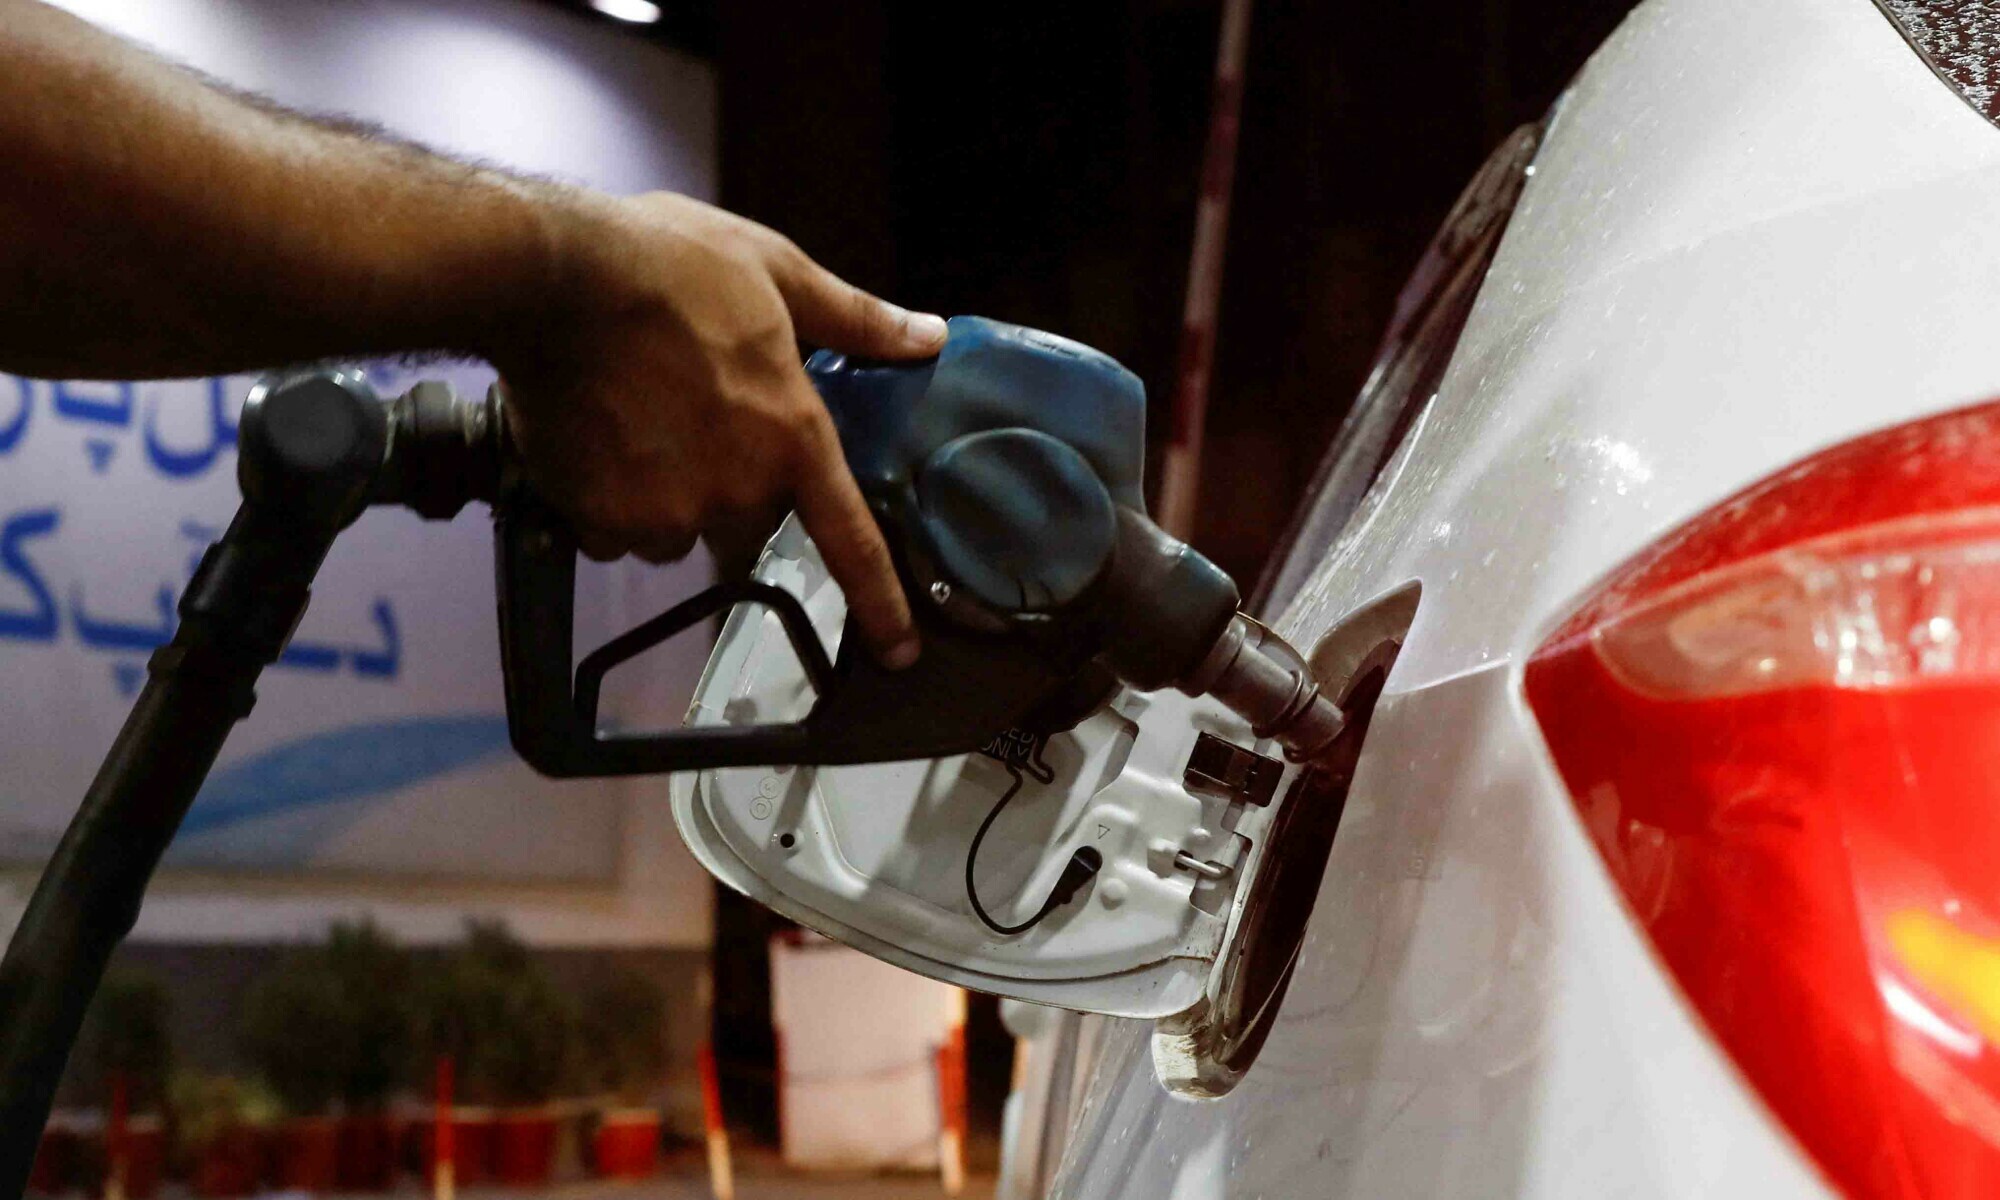 Petroleum prices unbearable, warn business leaders